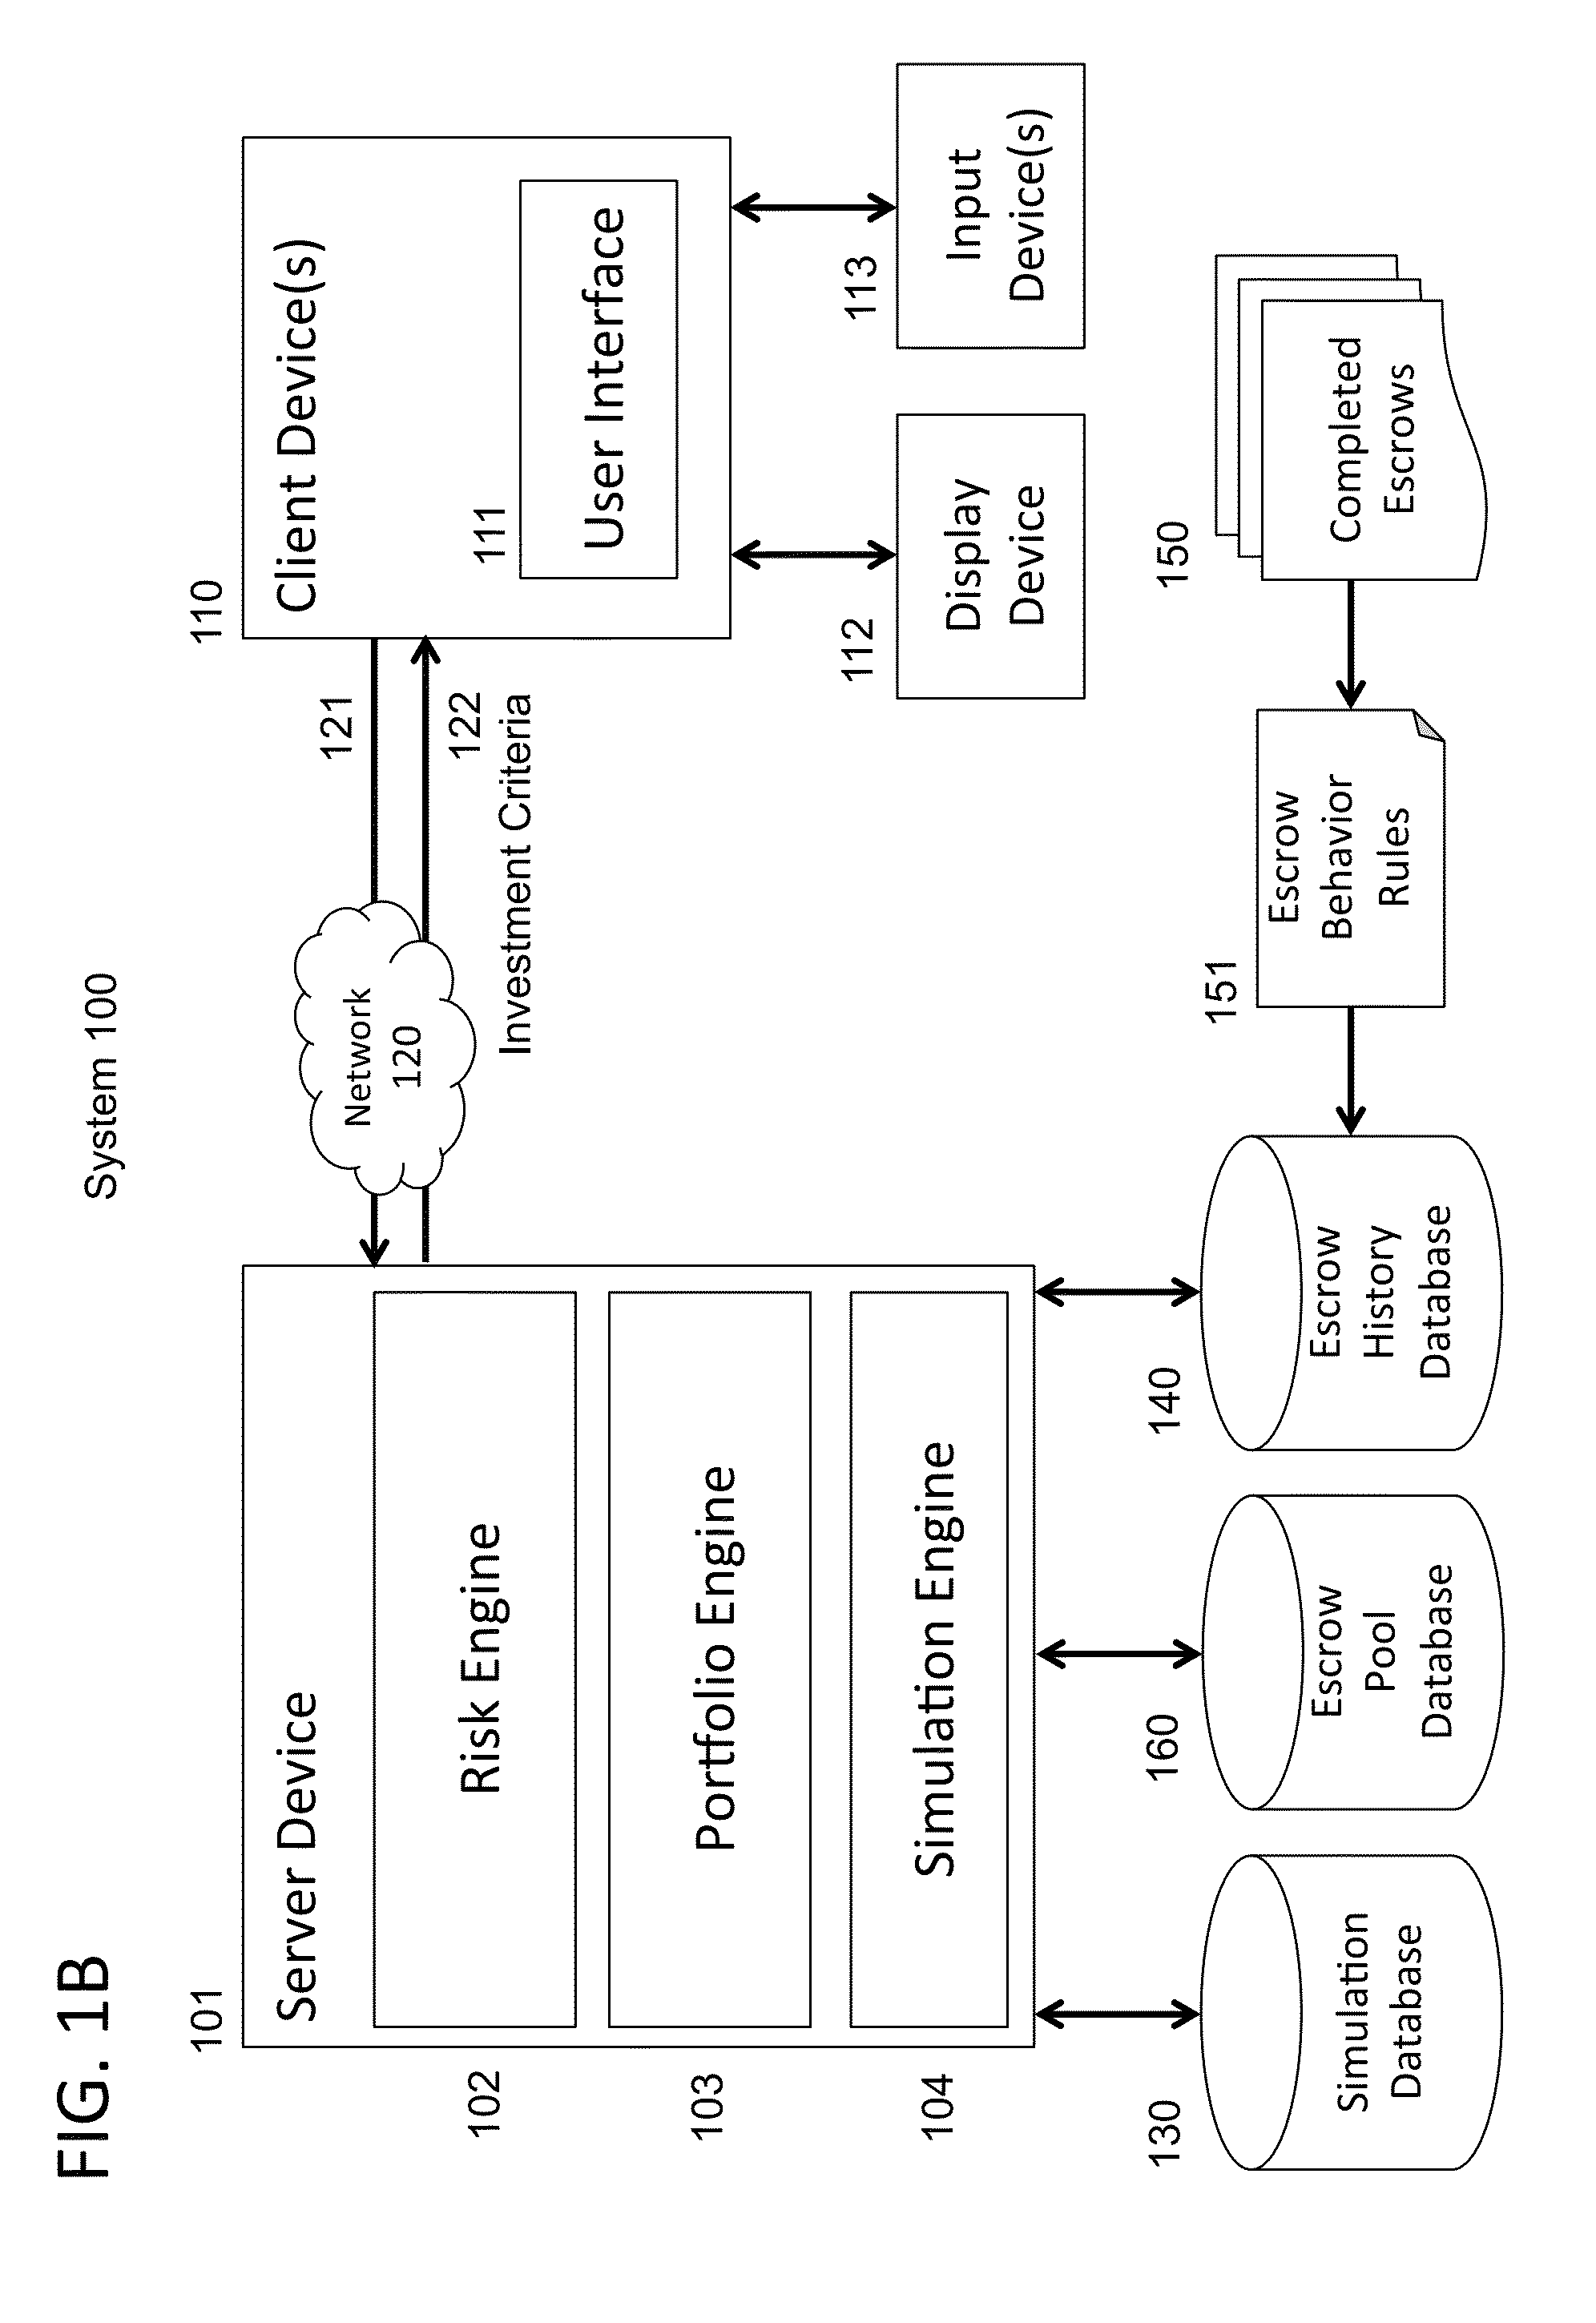 System and method of generating investment criteria for an investment vehicle that includes a pool of escrow deposits from a plurality of merger and acquisition transactions